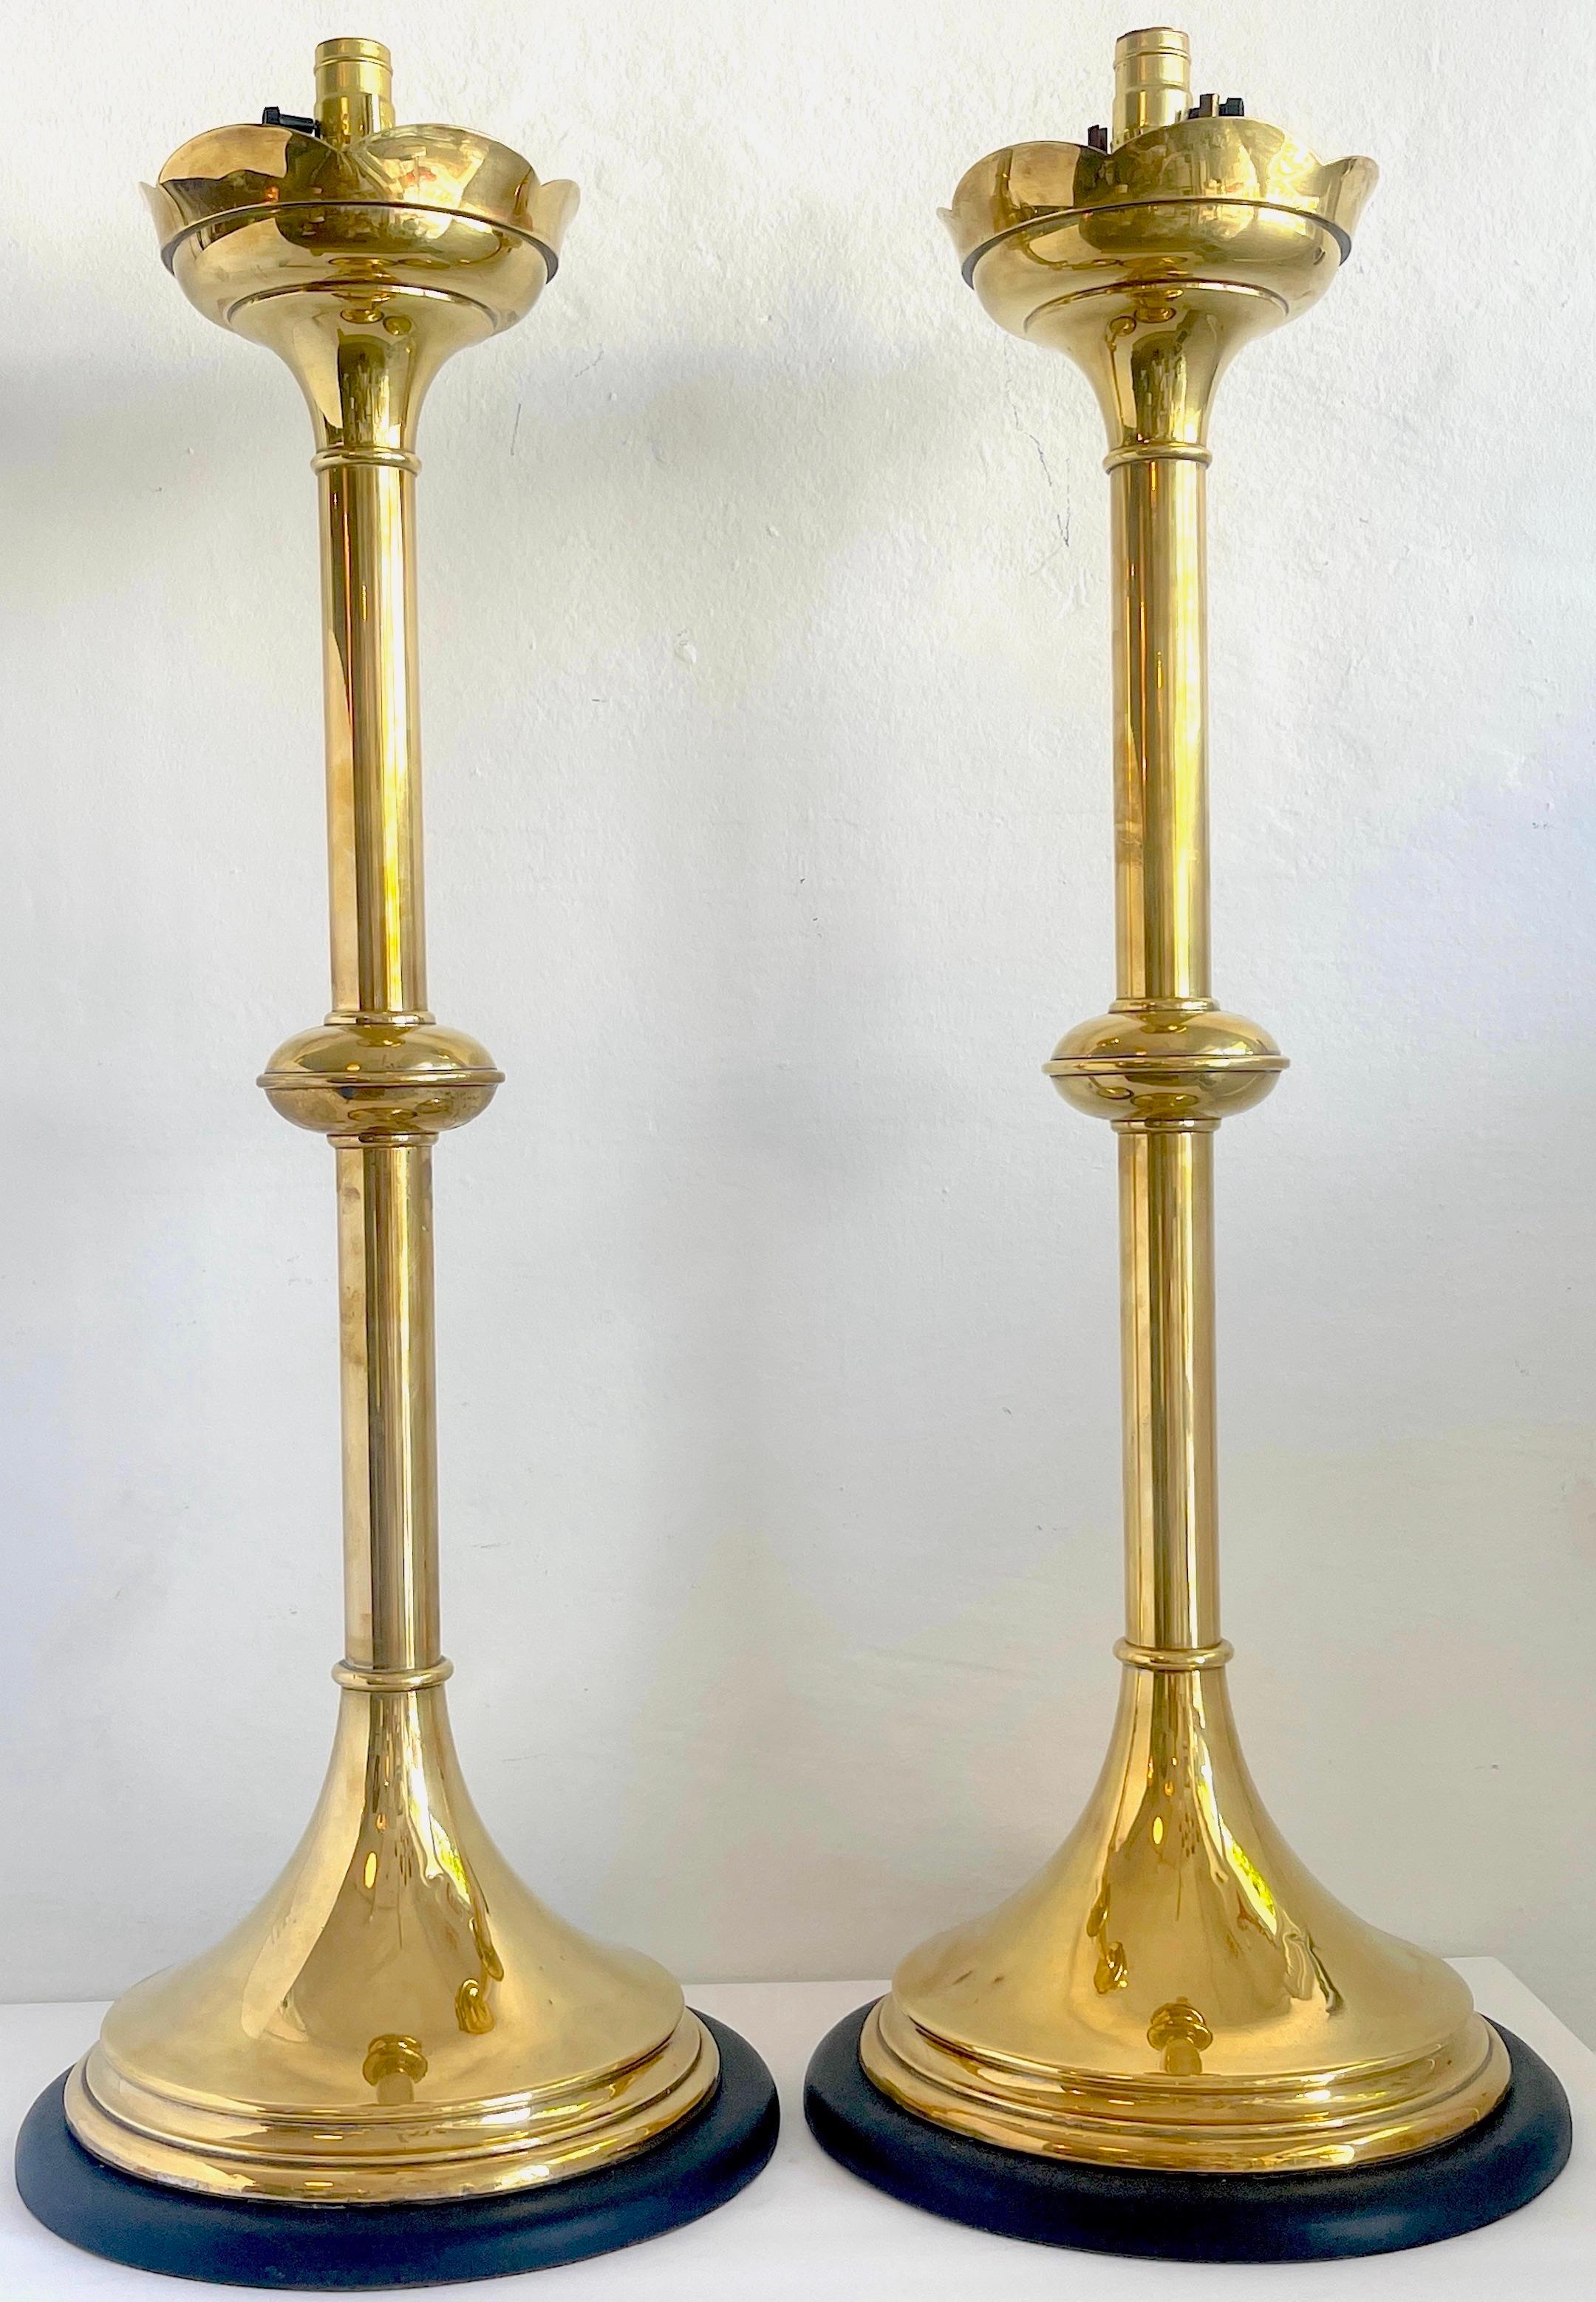 Pair of massive brass 'Trumpet' Gothic Style lamps
England, 1900s
Each one of substantial size and grace, standing 35-inches tot he socket, 32.5-Inches high to the the top of the column, resting on a 13-Inch diameter ebonized wood base. 

